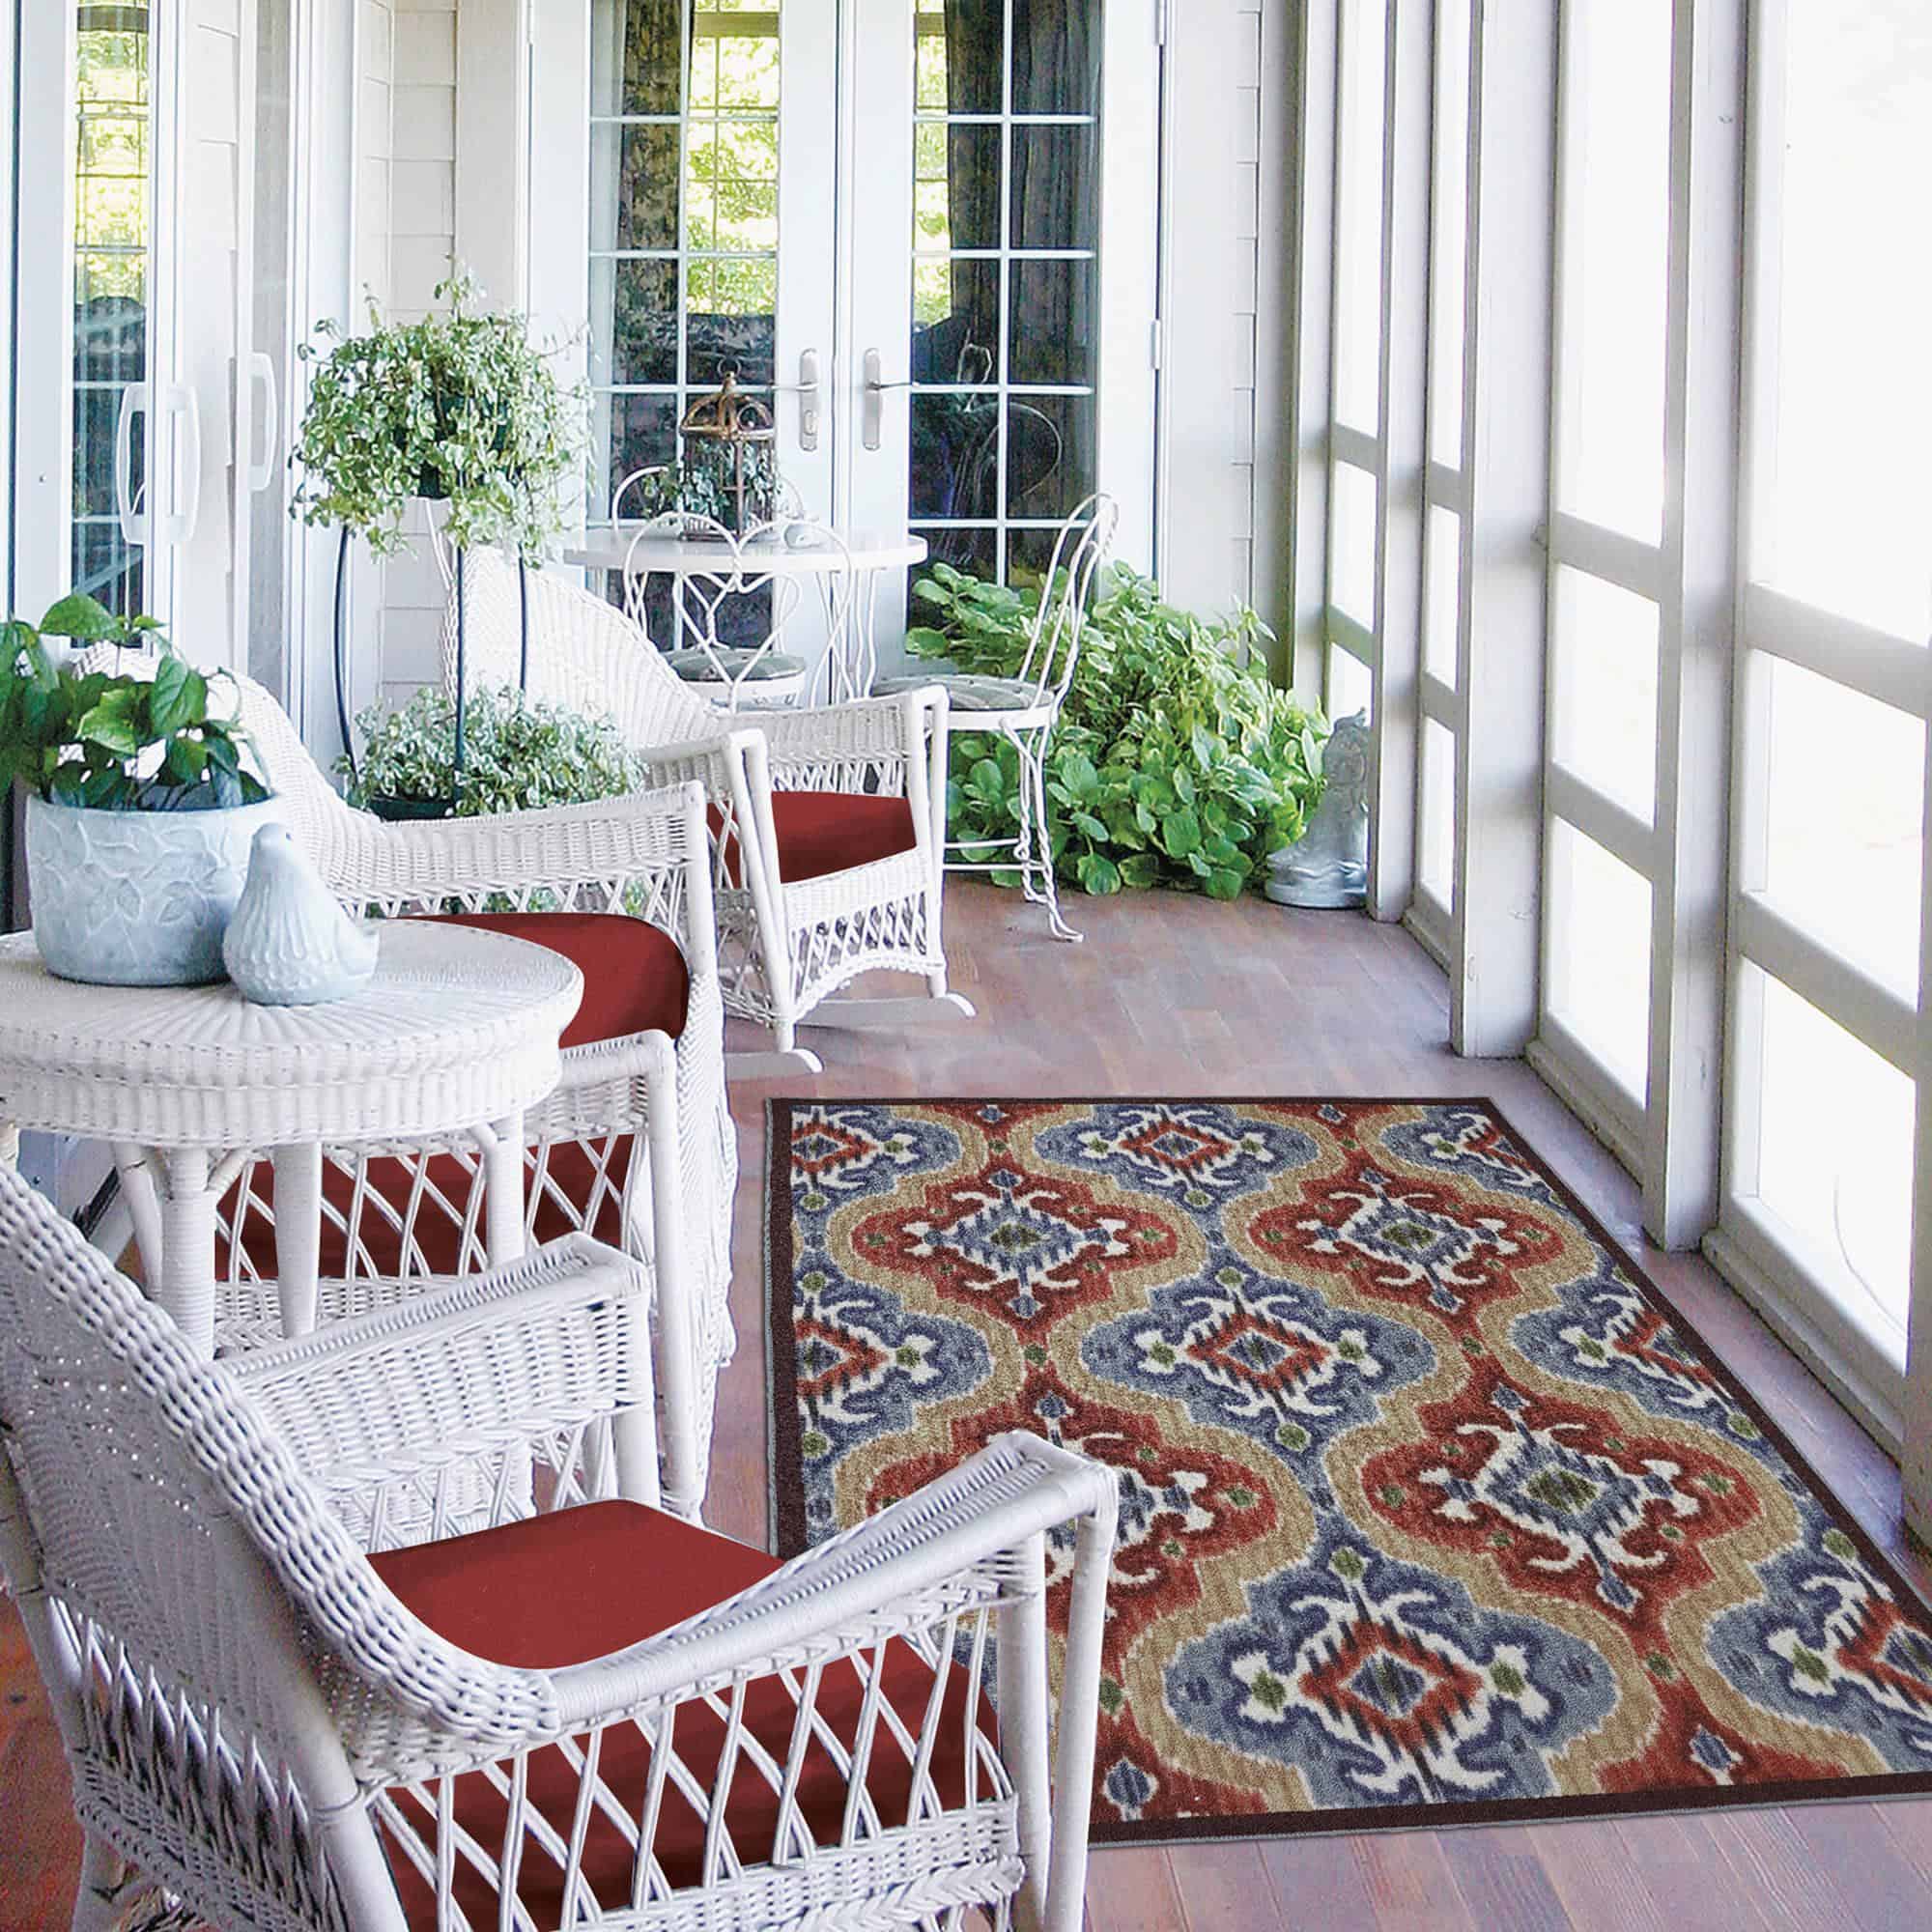 Classic wicker furniture brings the outdoors directly into your indoor space. It is an excellent material to have in your sunroom especially if your area is exposed to the outdoor elements.